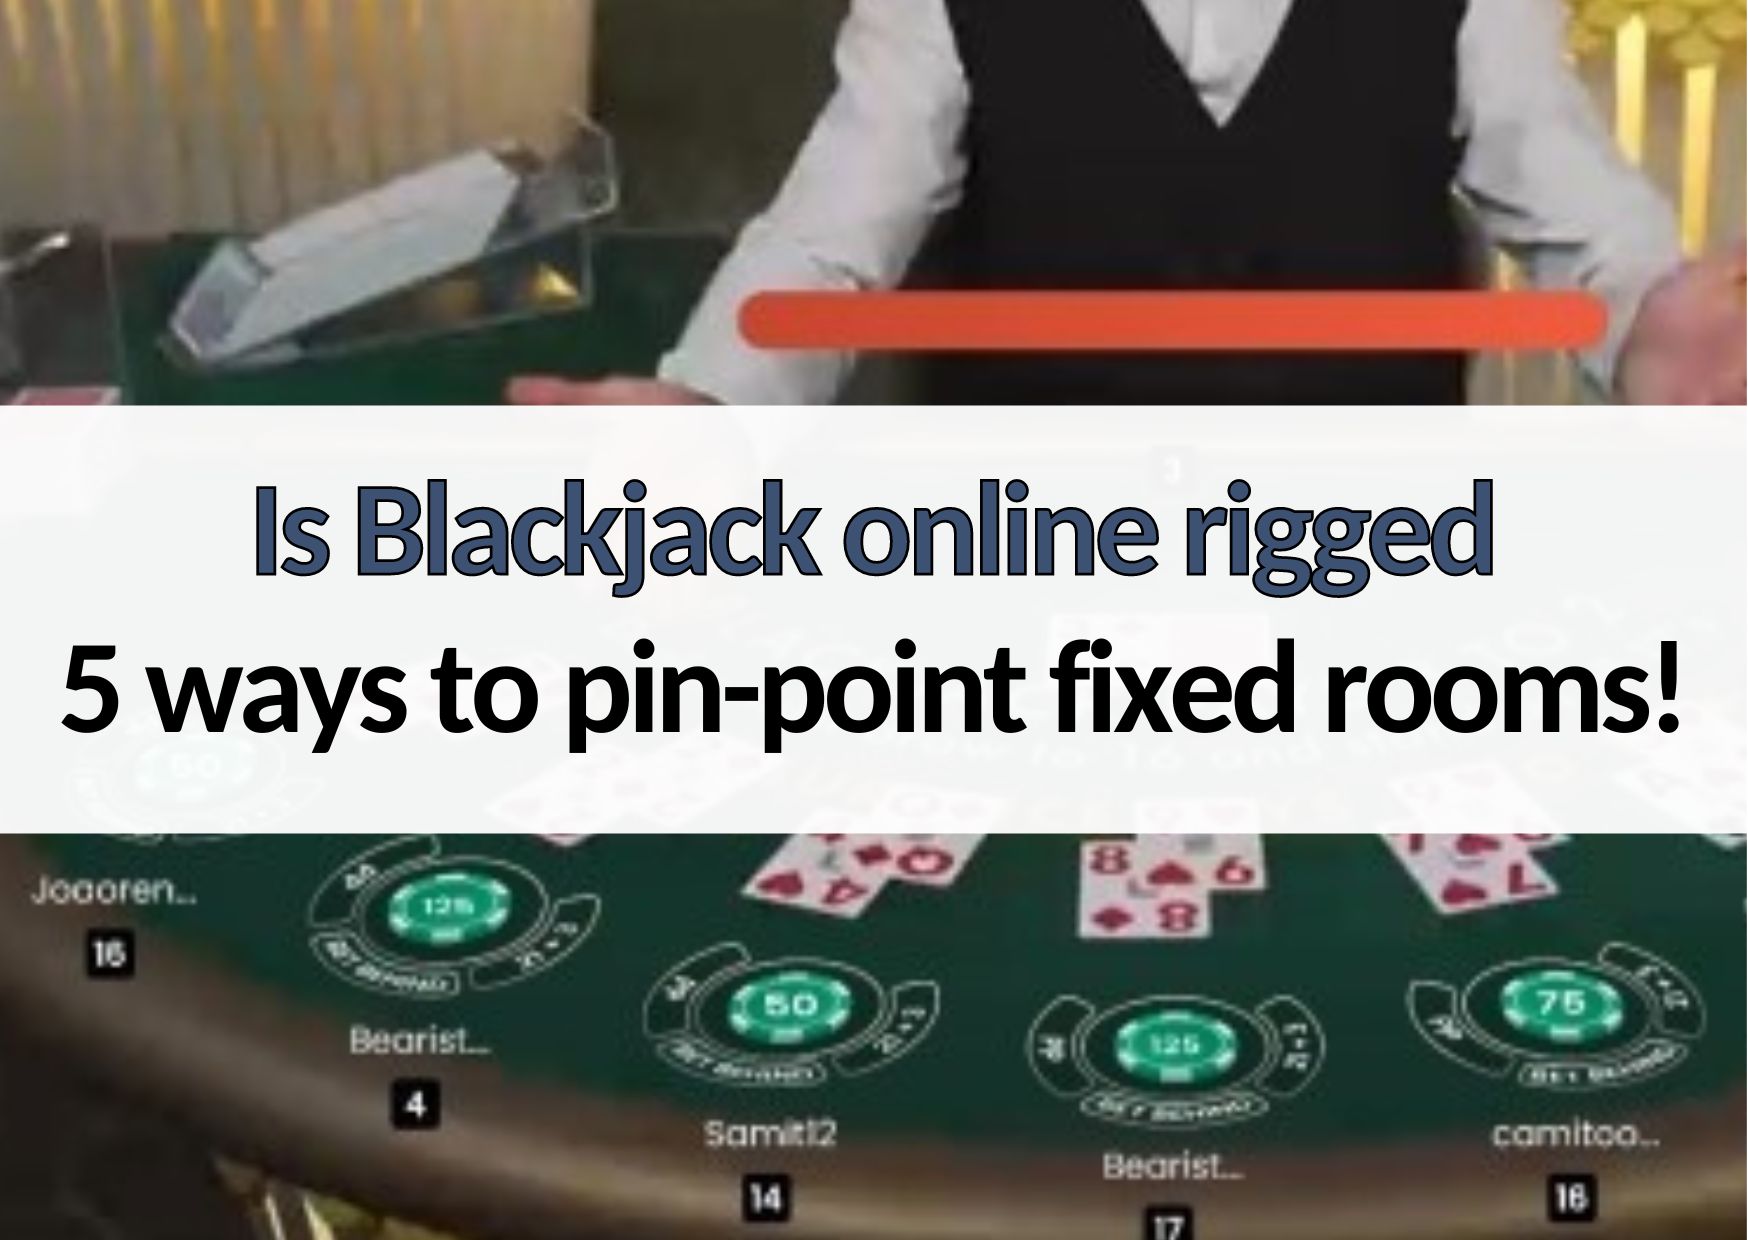 w88zo is blackjack online rigged know 5 ways to identify fixed rooms